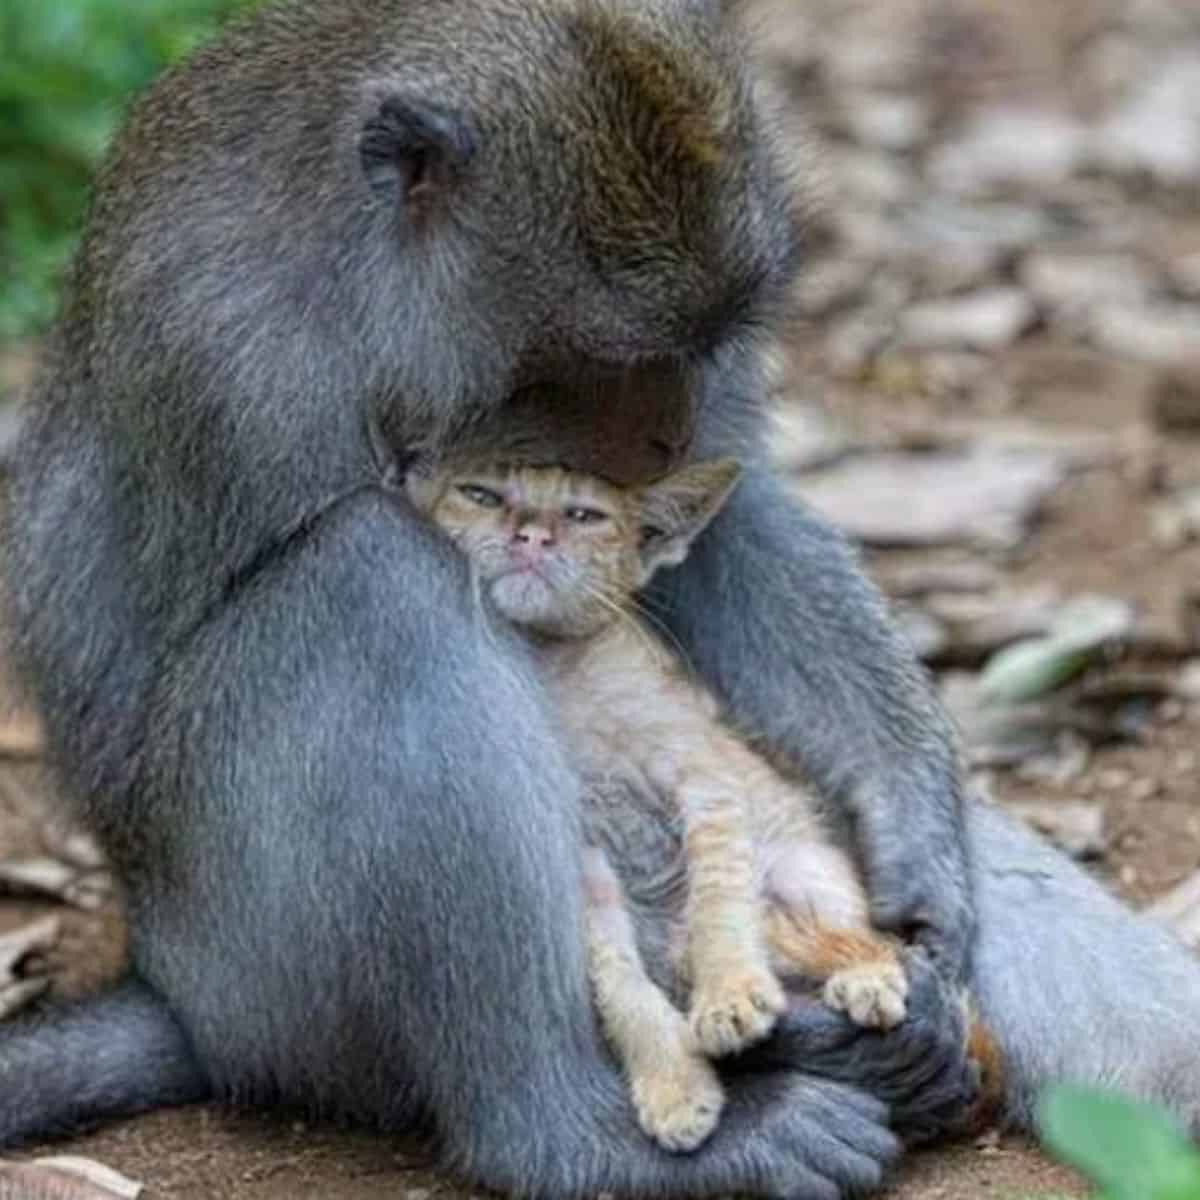 a kitten in the arms of a monkey